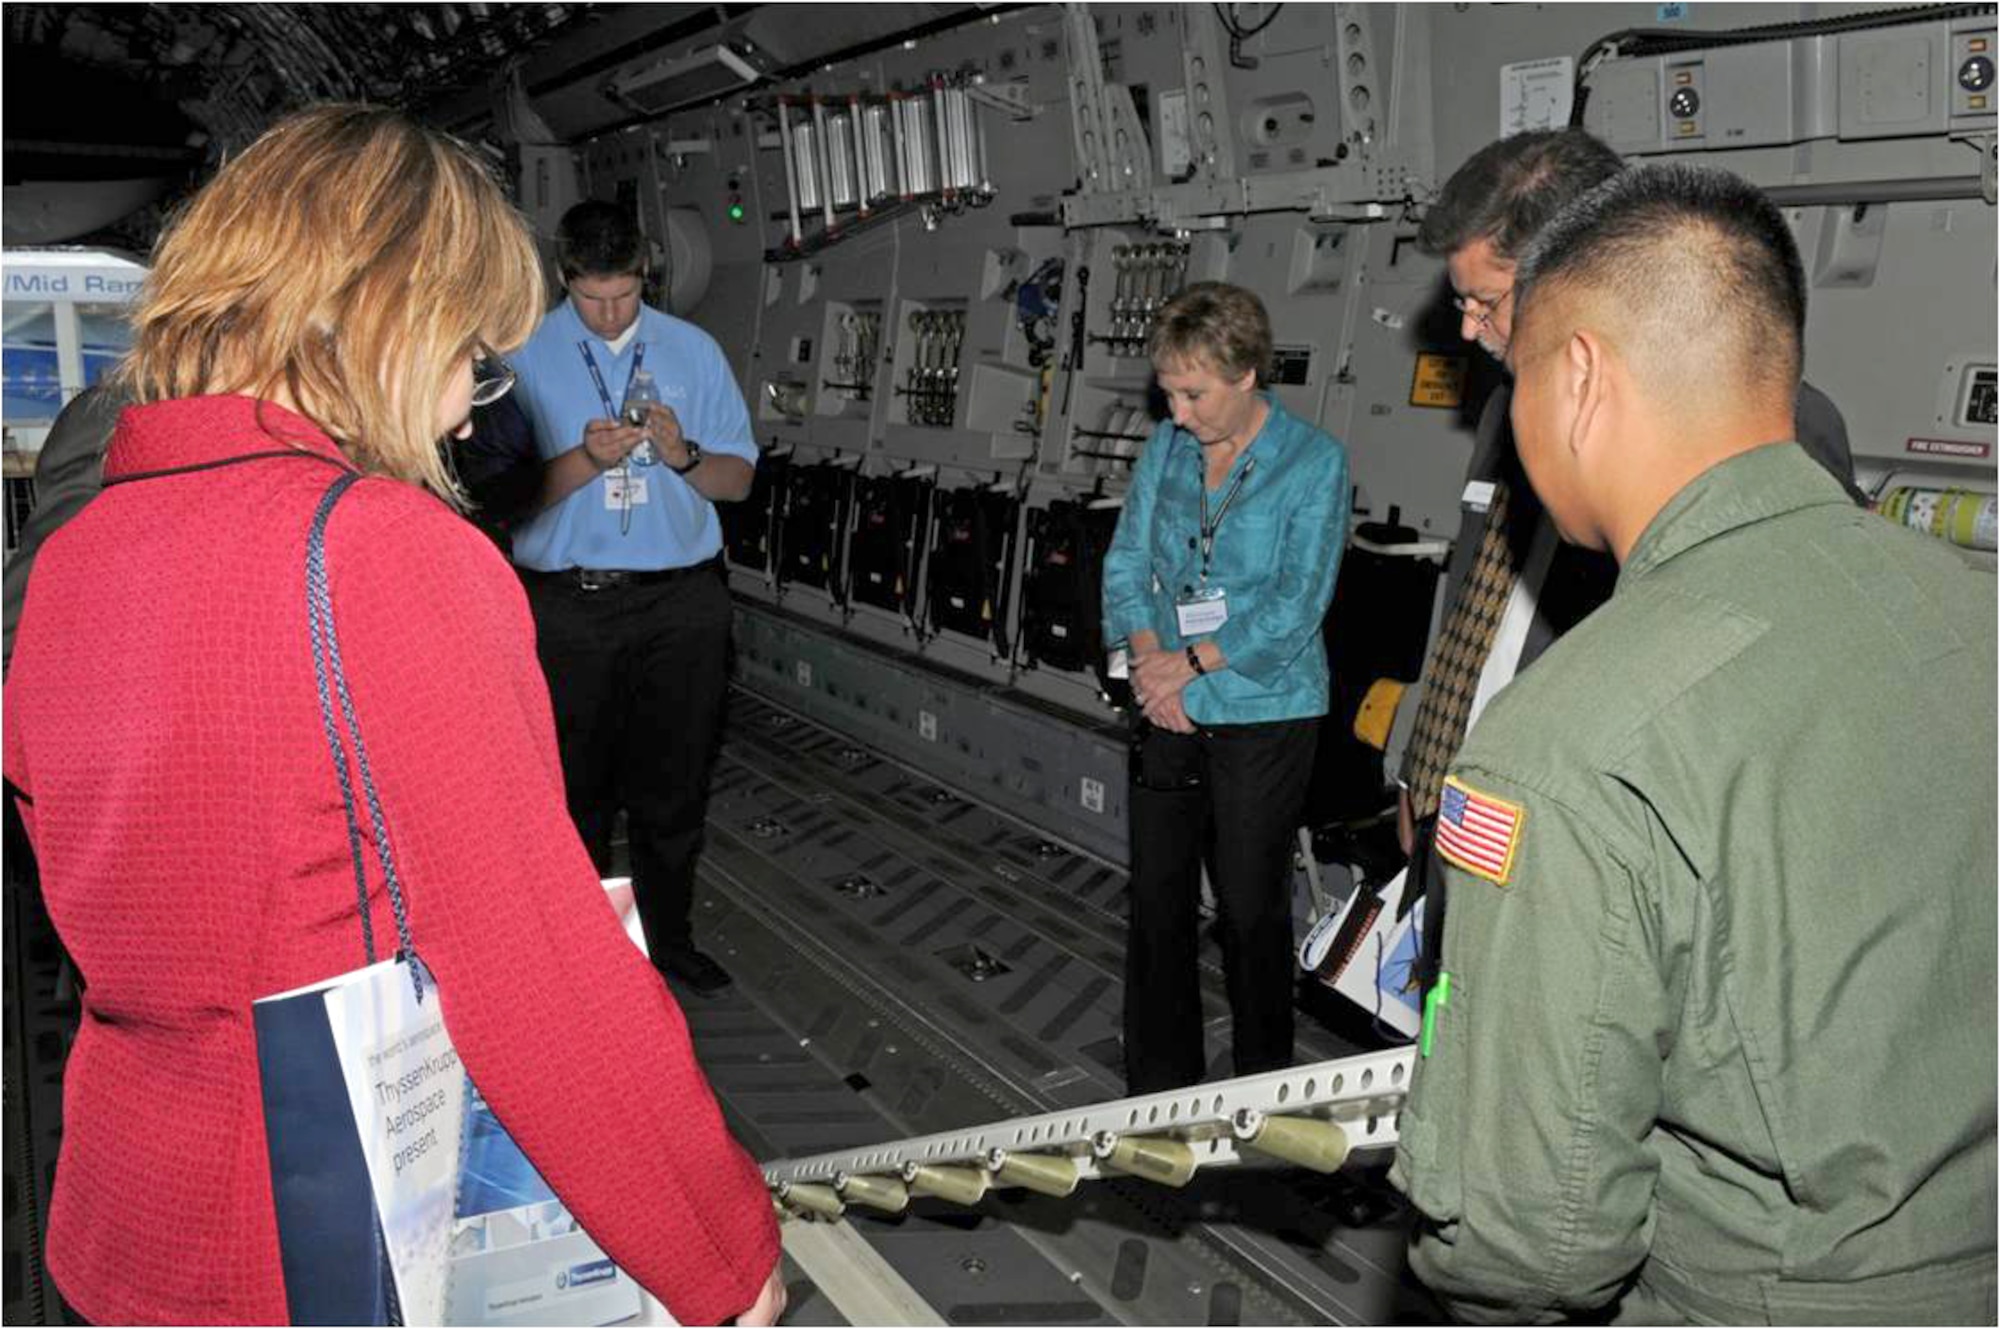 Spectators tour the cargo bay of a C-17 Globemaster III from Travis Air Force Base, Calif., July 20, 2010, in Farnborough, England. Eleven U.S. military aircraft and approximately 70 personnel representing all branches of service participate in the 2010 Farnborough International Air Show. (U.S. Air Force photo/Staff Sgt. Jerry Fleshman) 